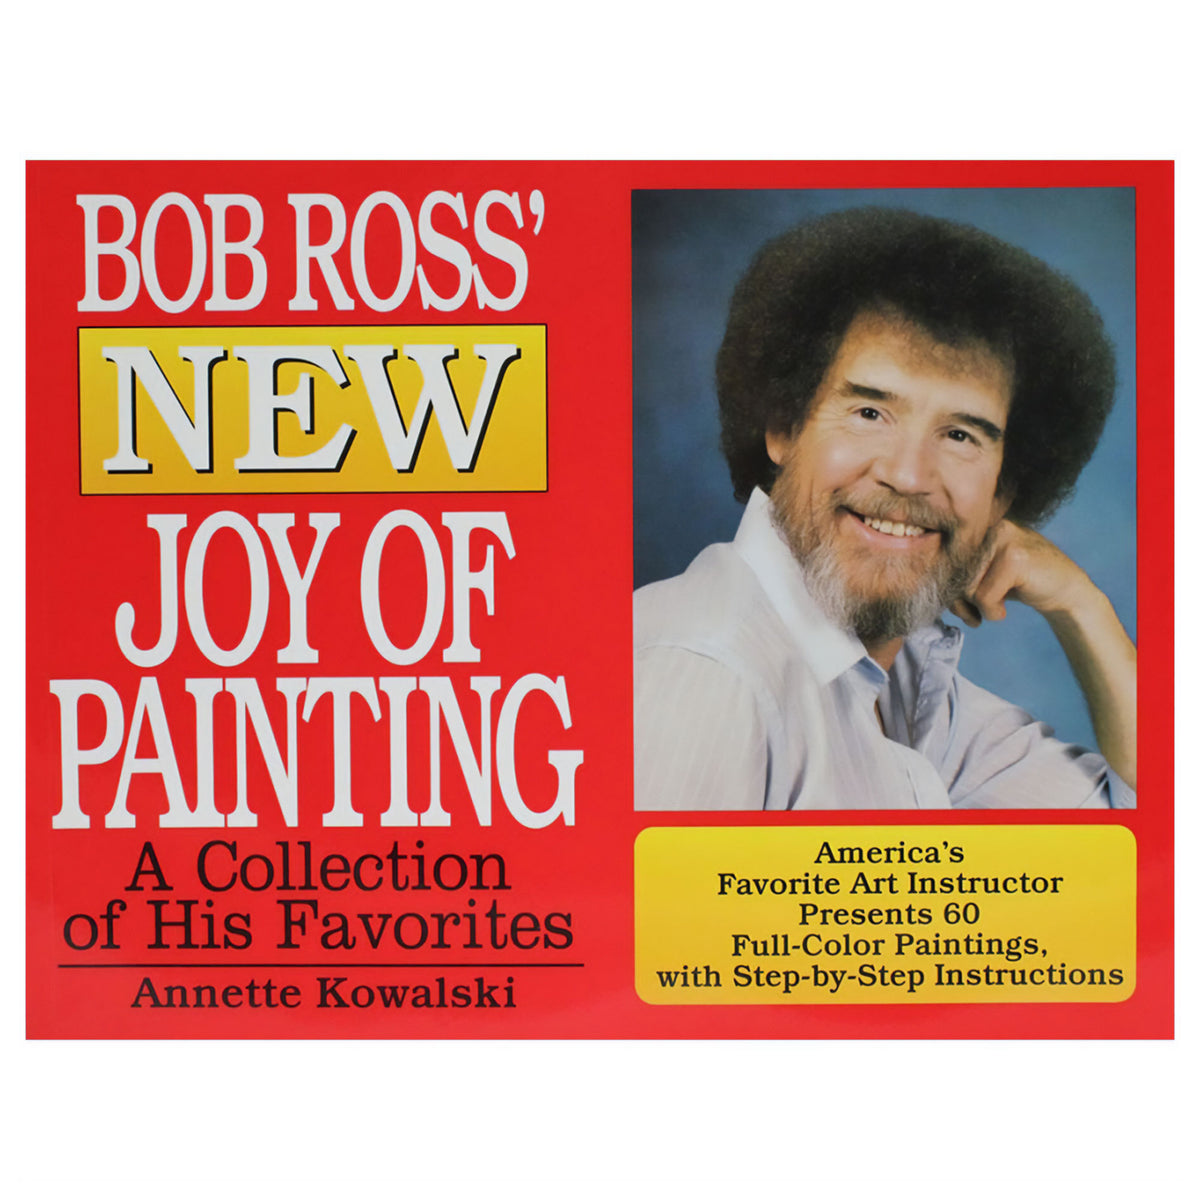 Bob Ross&#39; NEW Joy of Painting - A Collection of his Favorites